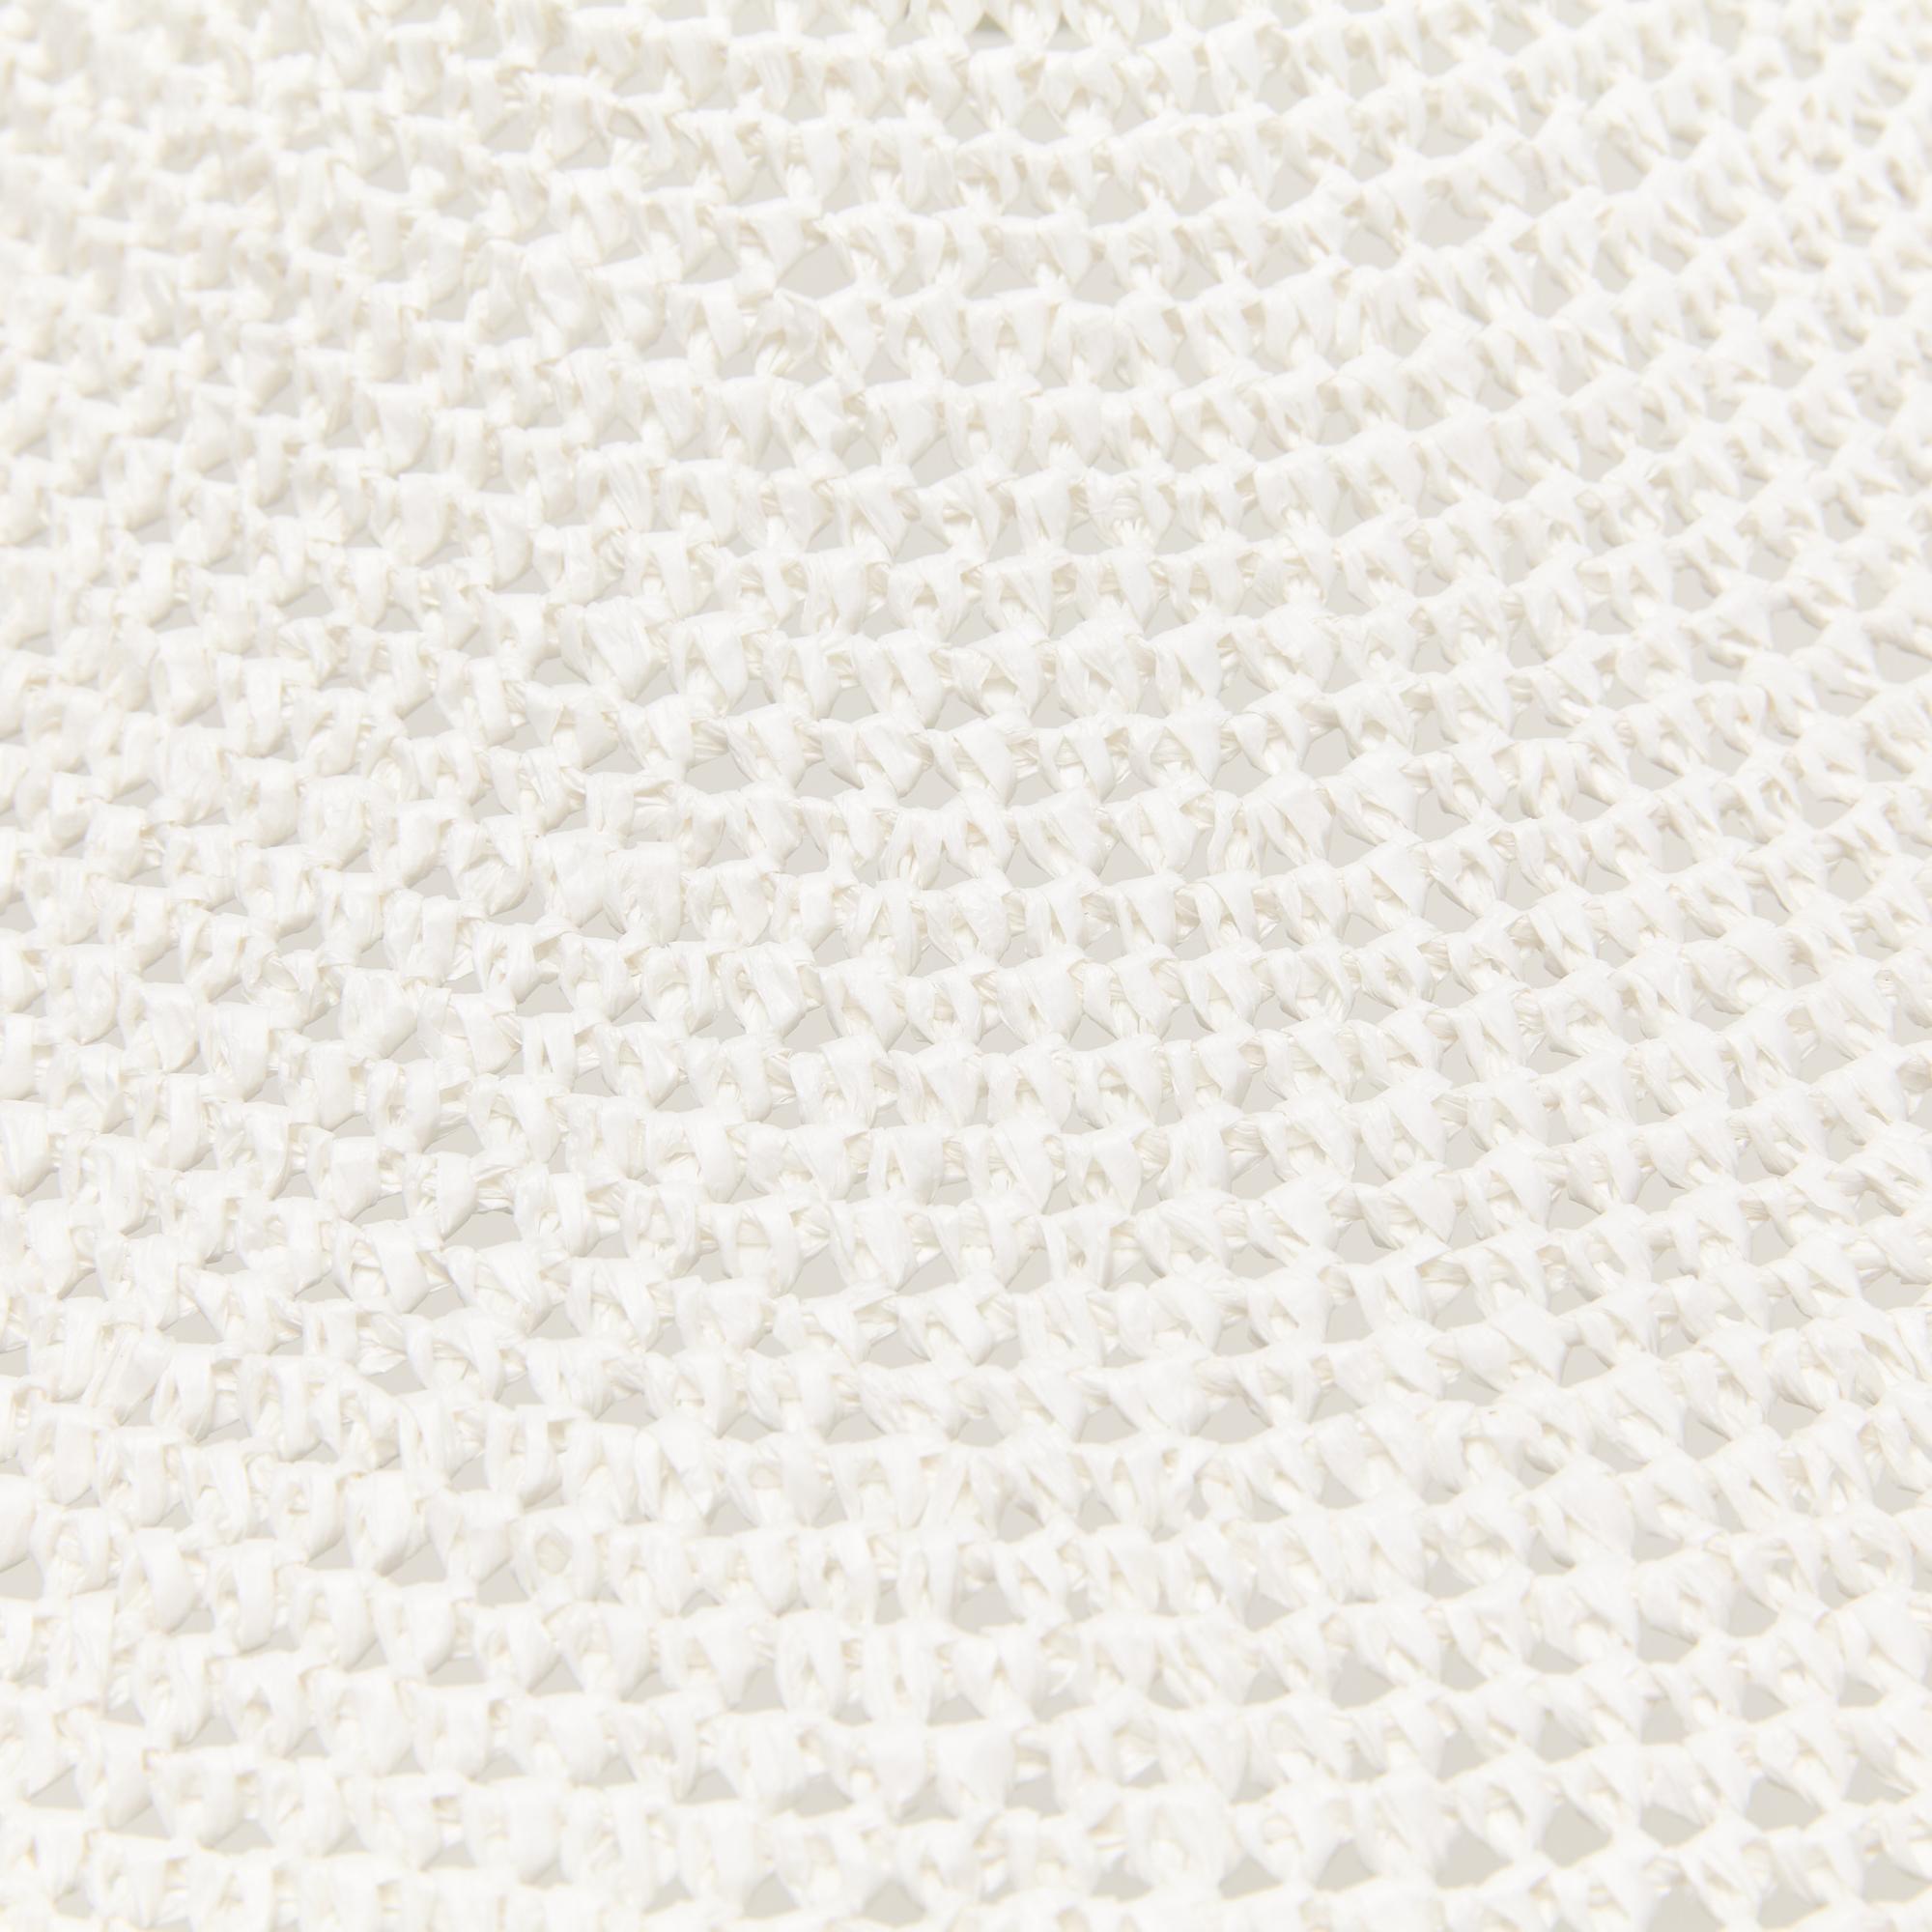 British SS02 Pendant Light Ø80cm/31.5in, Hand Crocheted in 100% Egyptian Cotton For Sale